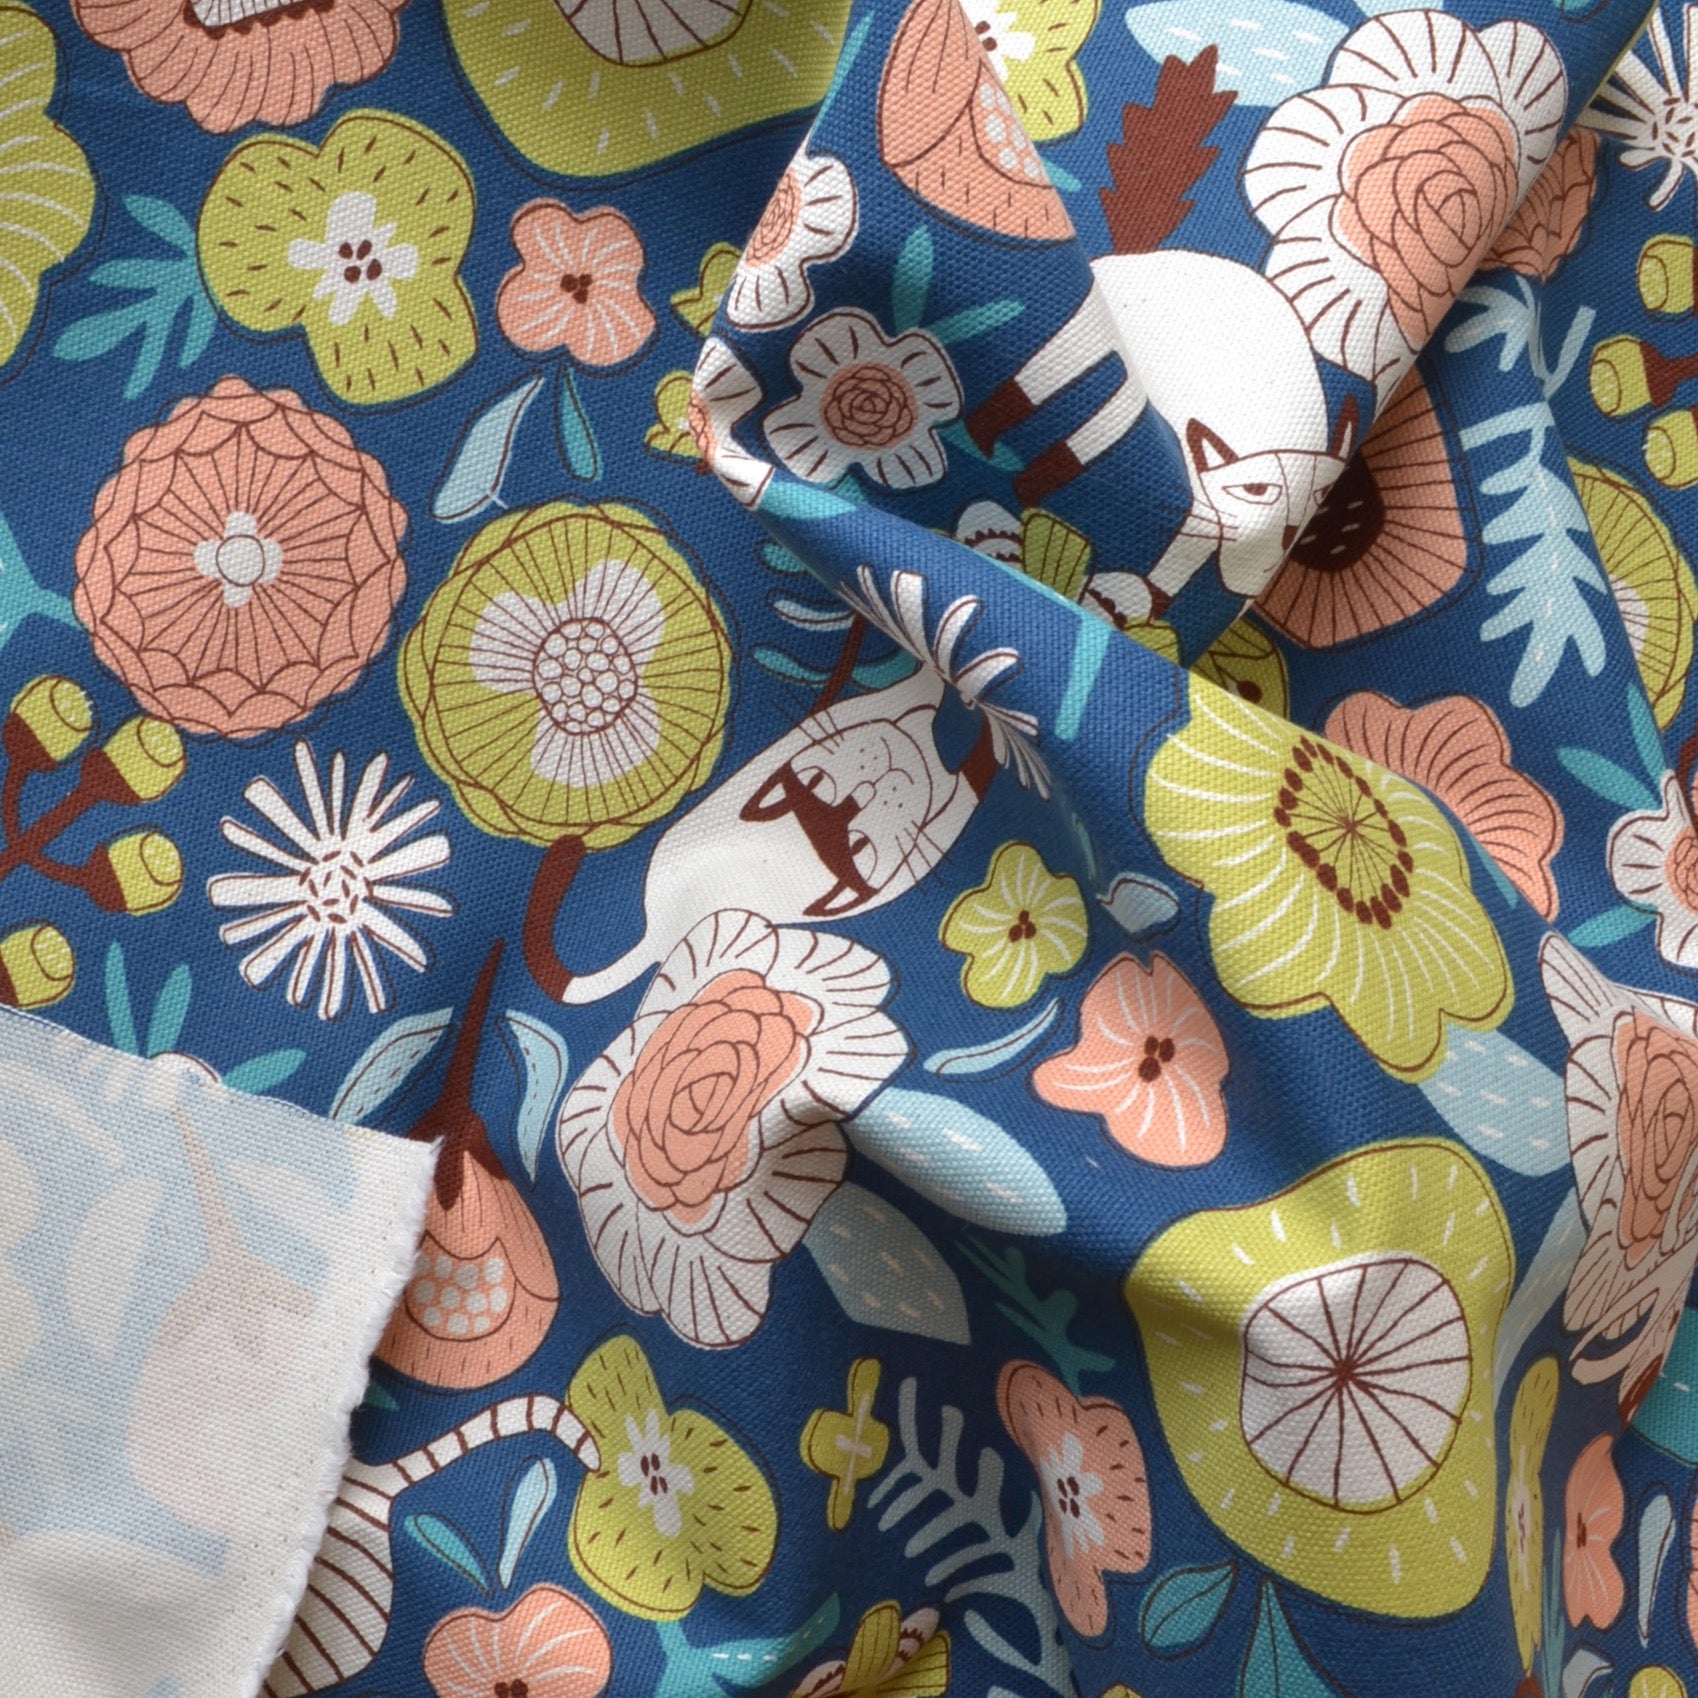 Stylised Cats & Flowers on Cotton Fabric